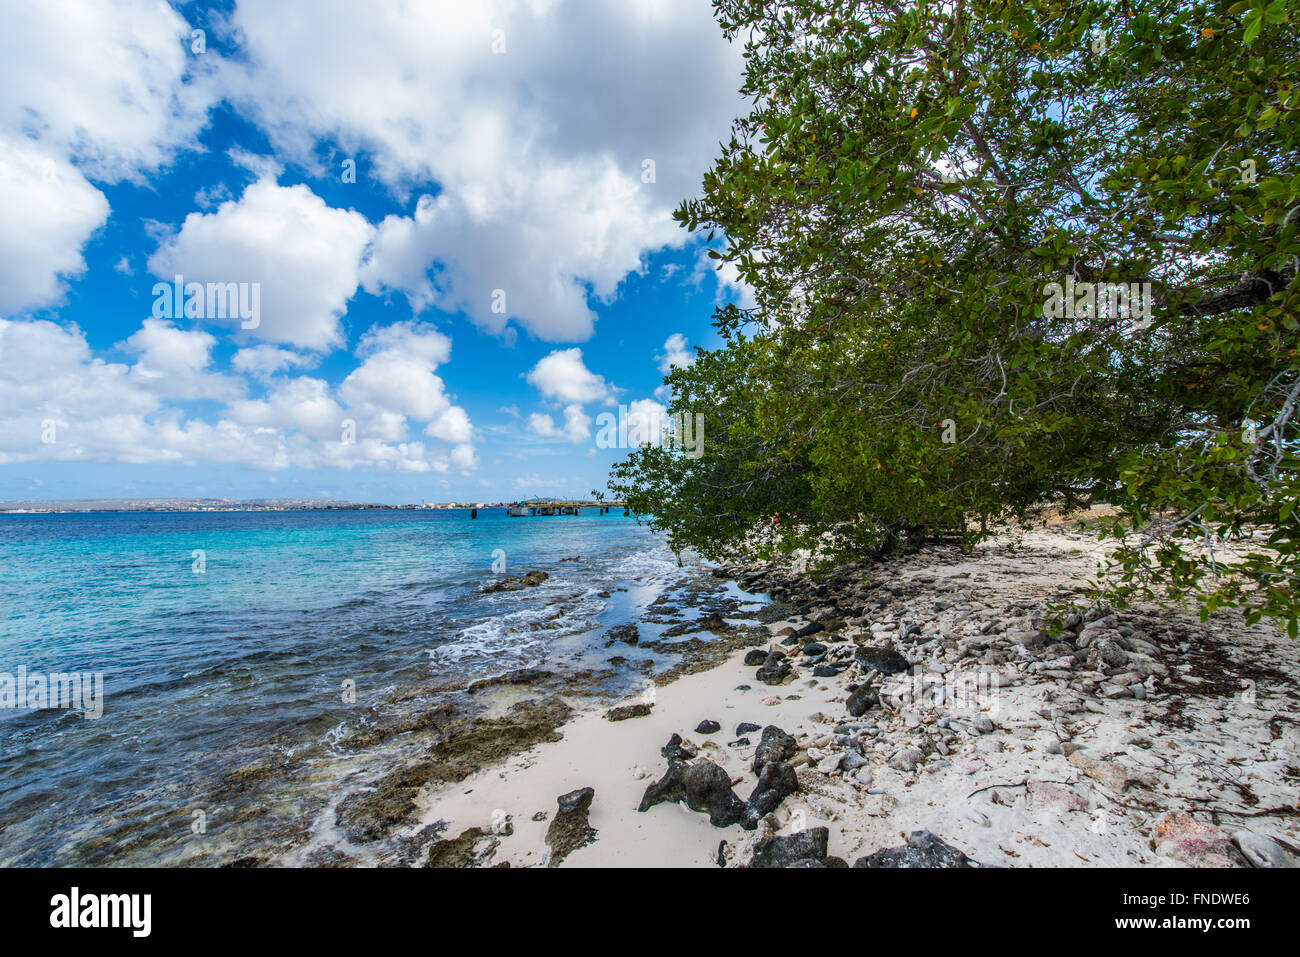 Beautiful view over the beaches and Caribbean sea of Bonaire National Marine Park one of the worlds most beautiful diving and snorkling locations Stock Photo